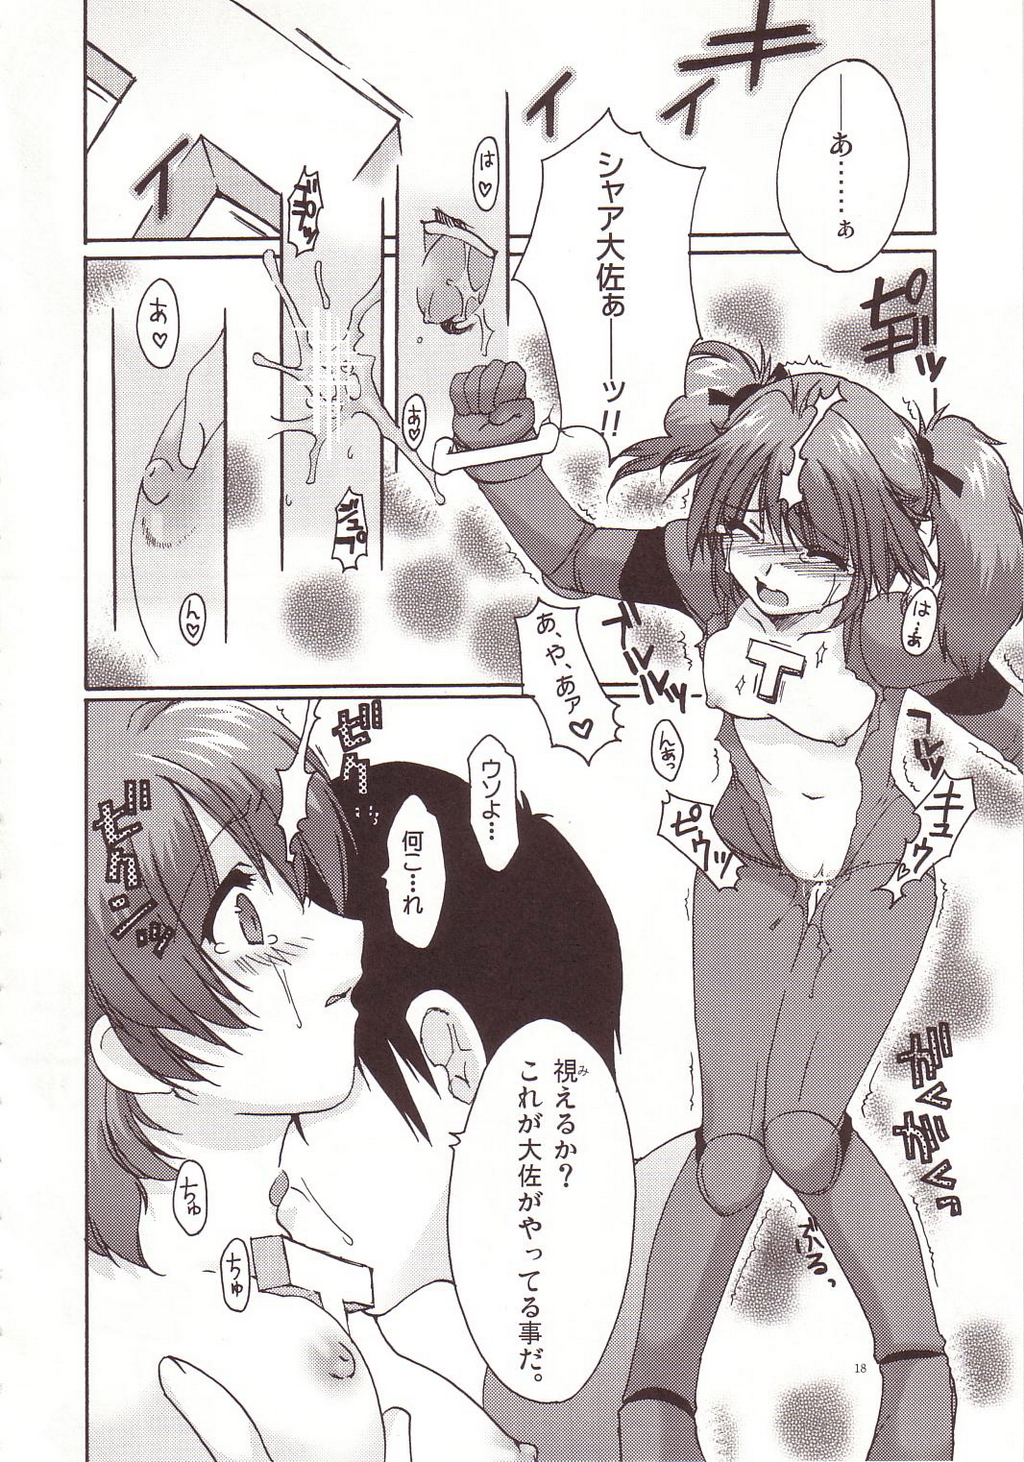 [AKABEi SOFT (Alpha)] Aishitai I WANT TO LOVE (Mobile Suit Gundam Char's Counterattack) page 17 full